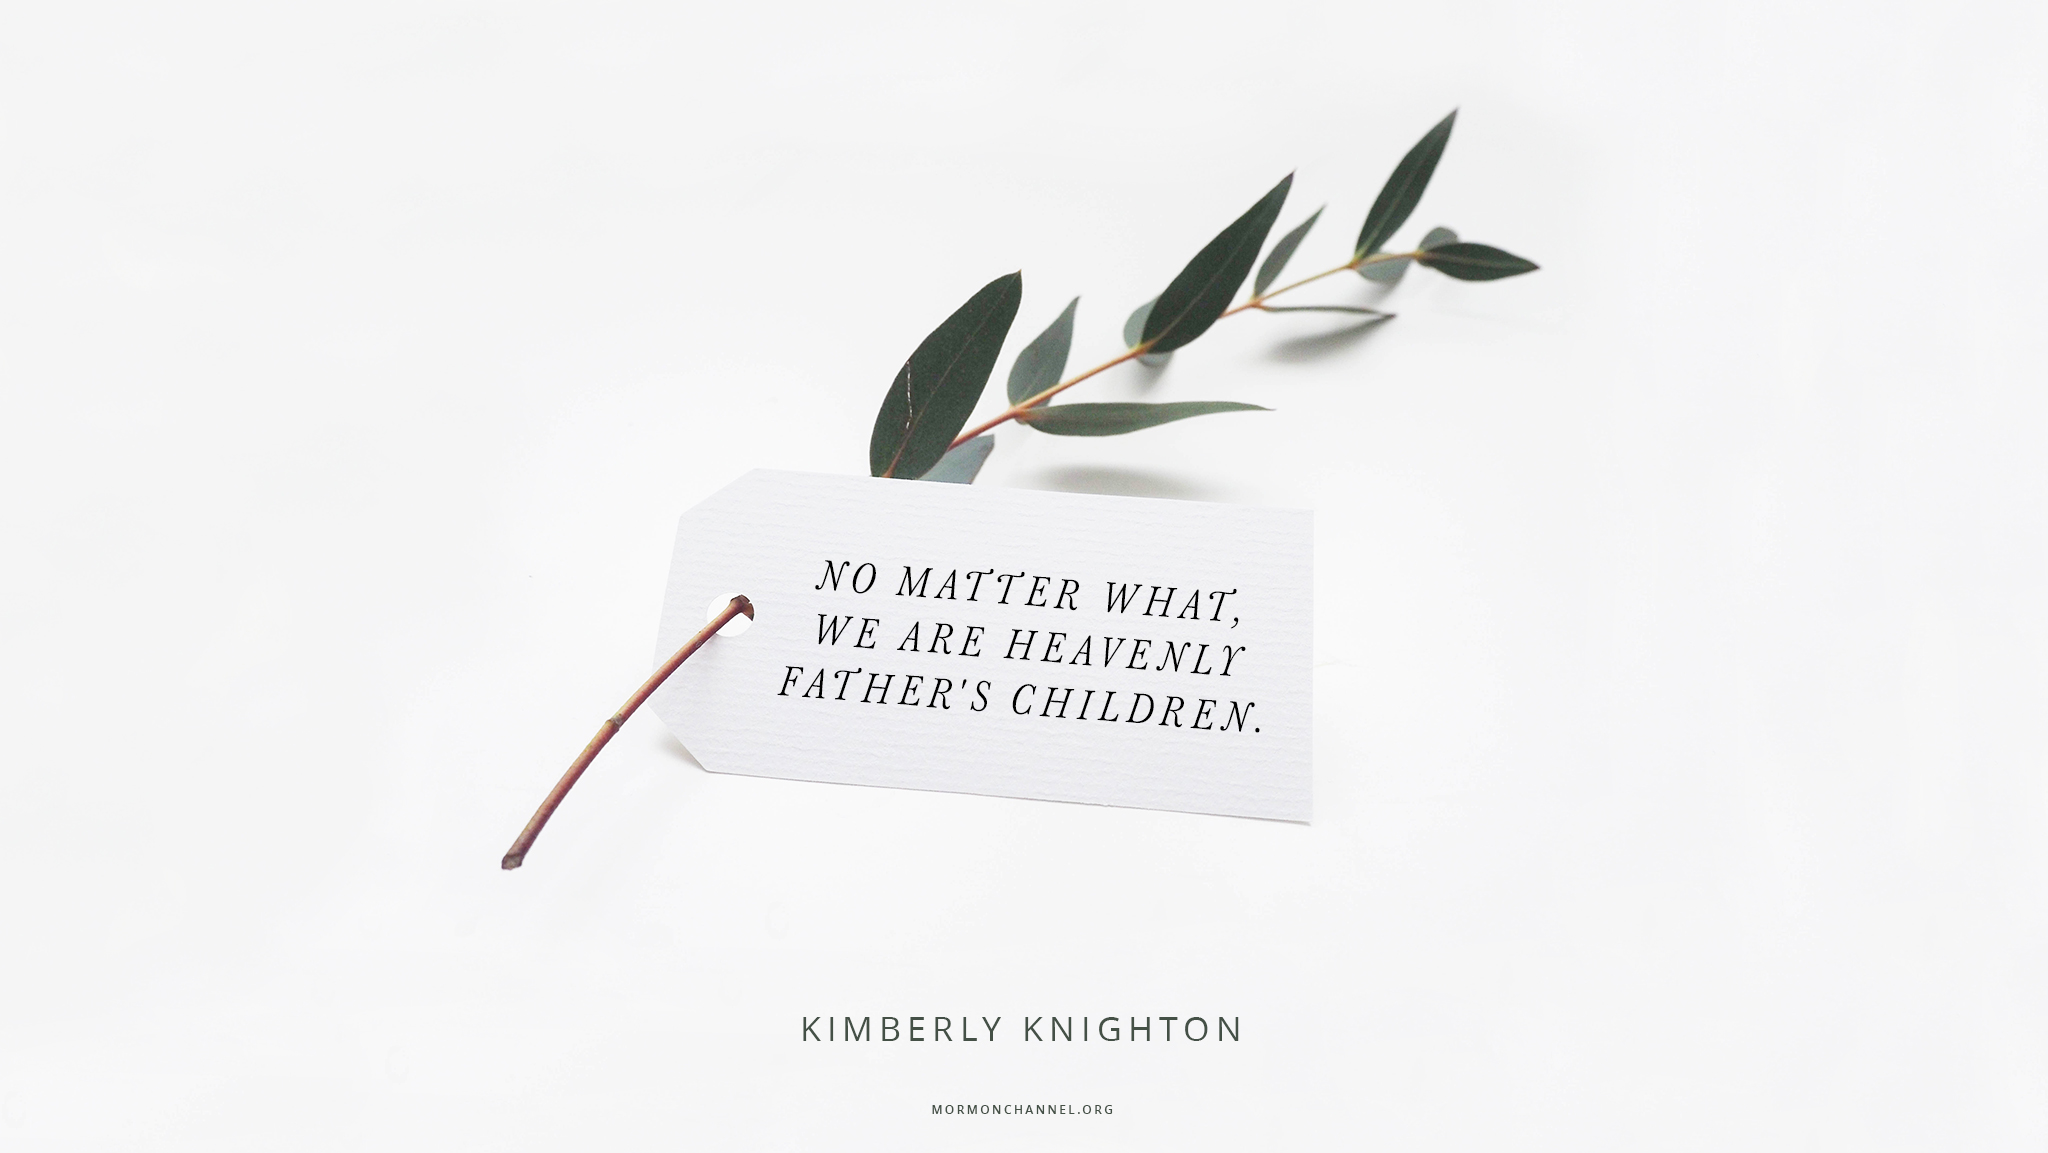 no matter what, we are heavenly father’s children. kimberly knighton